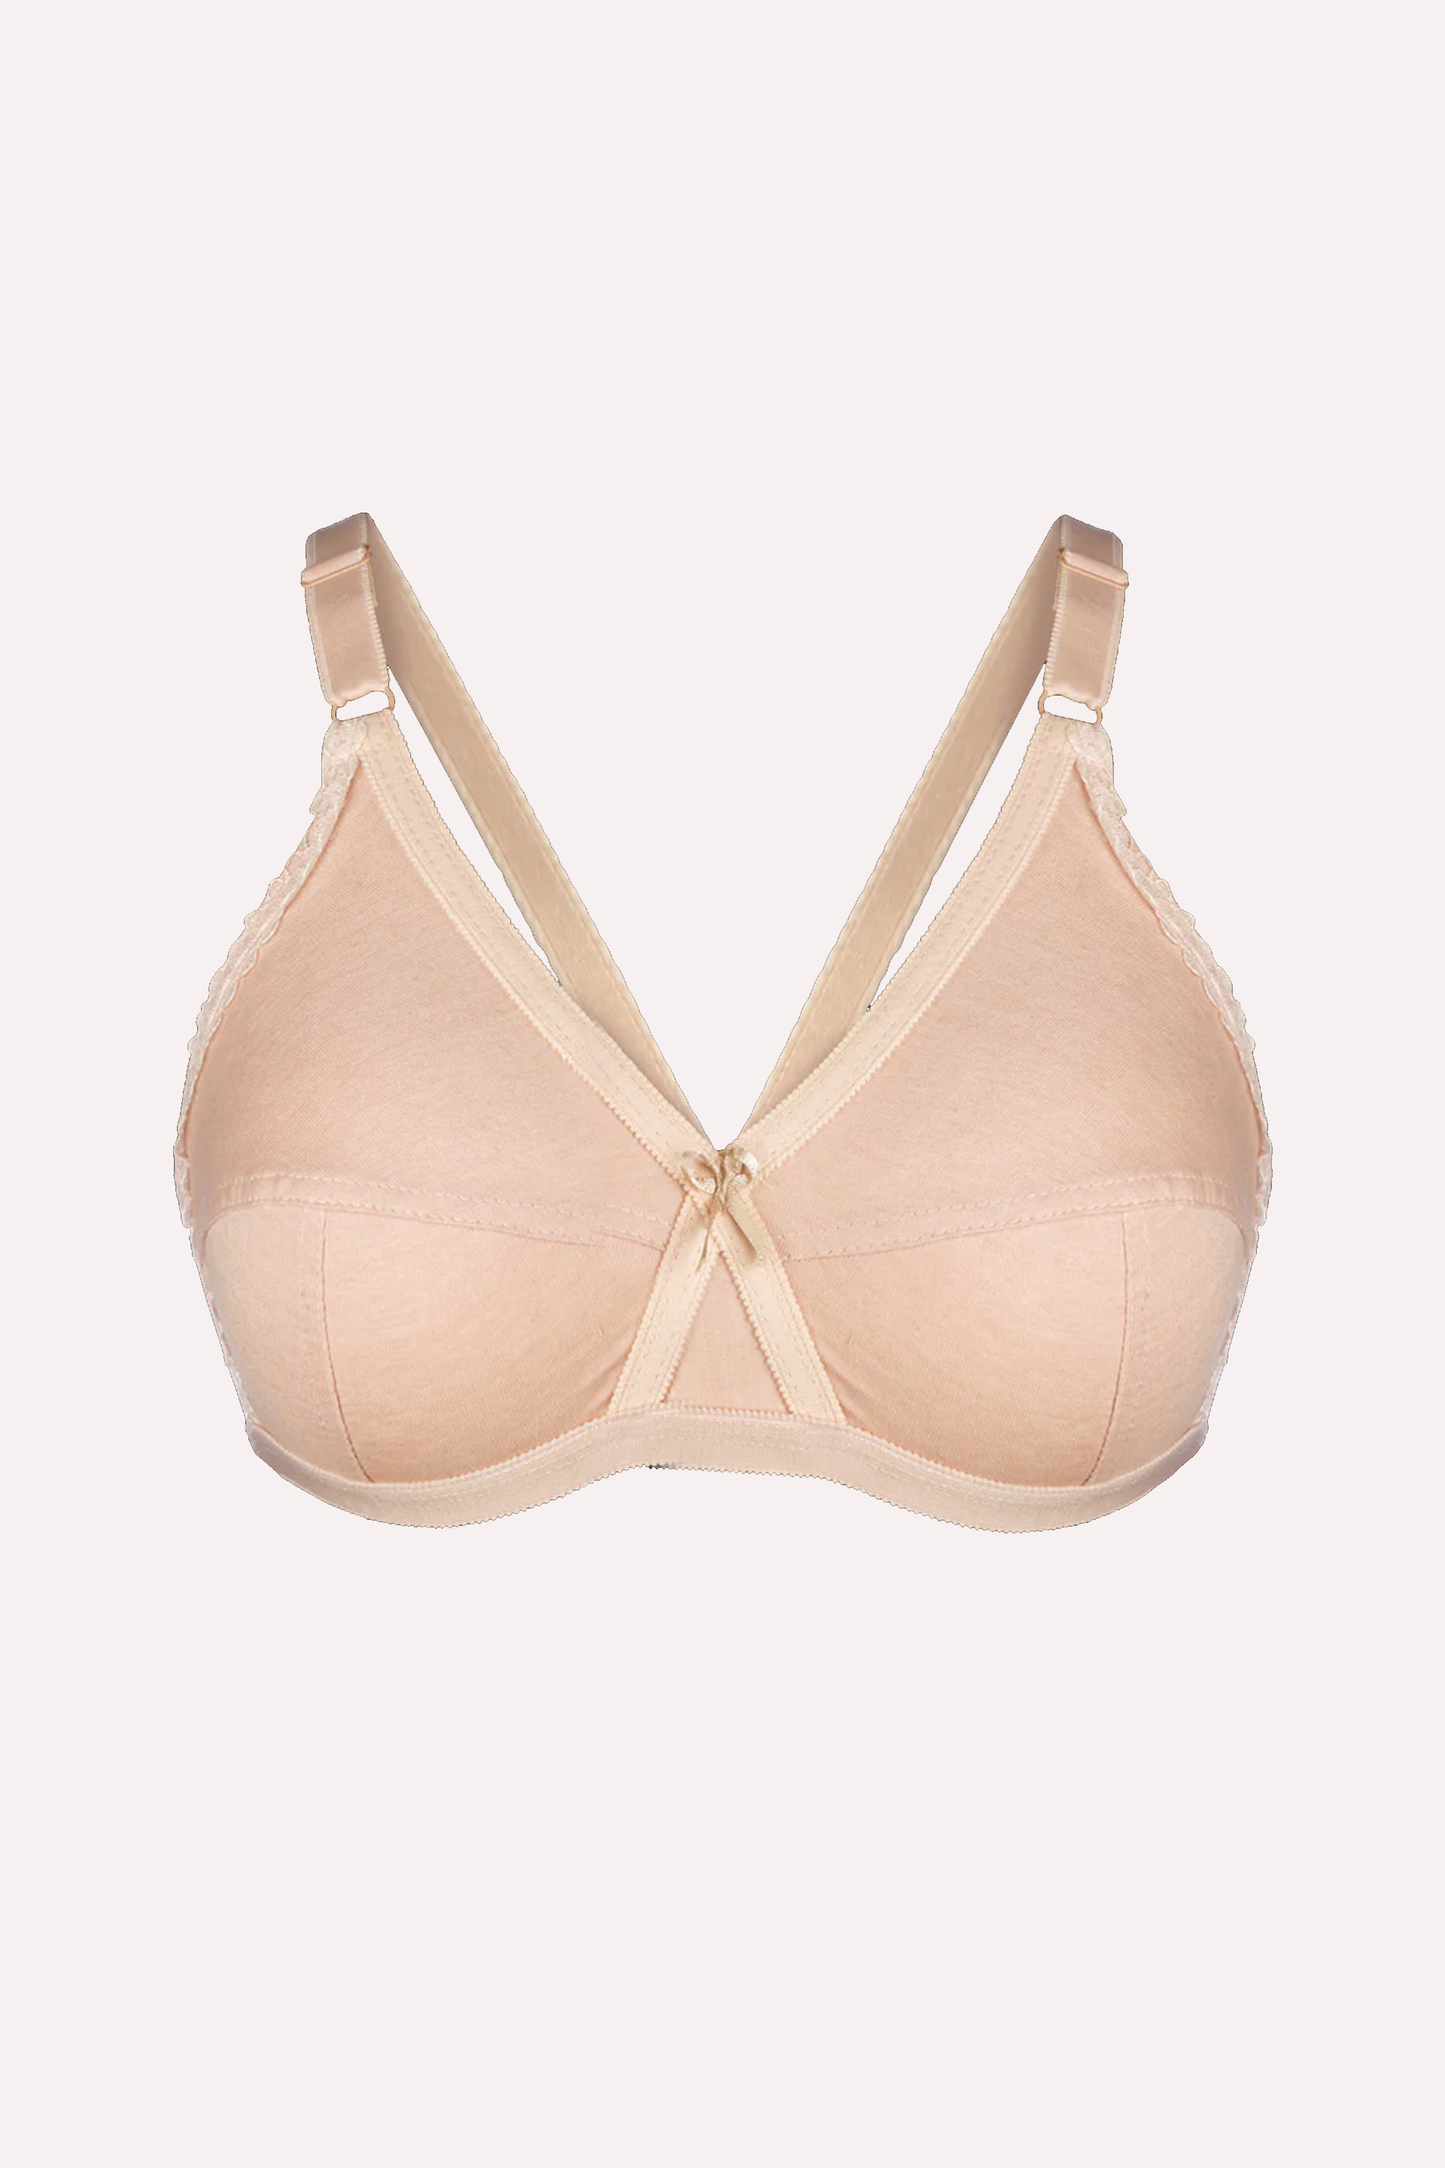 Fame - Adjustable Non-wired Full Coverage Bra